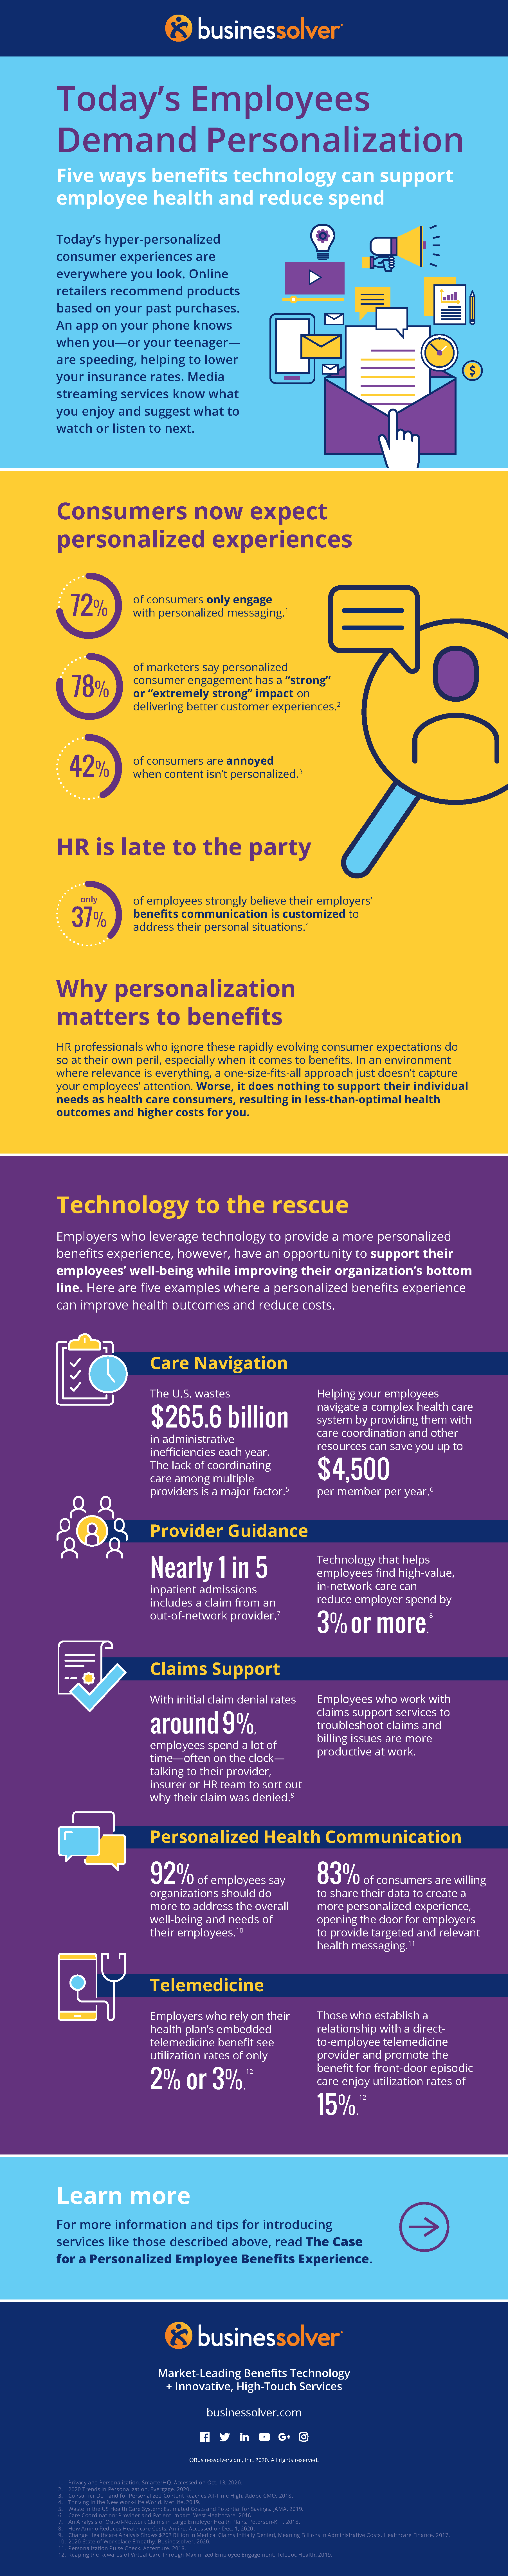 full-image-employees-demand-personalization-infographic